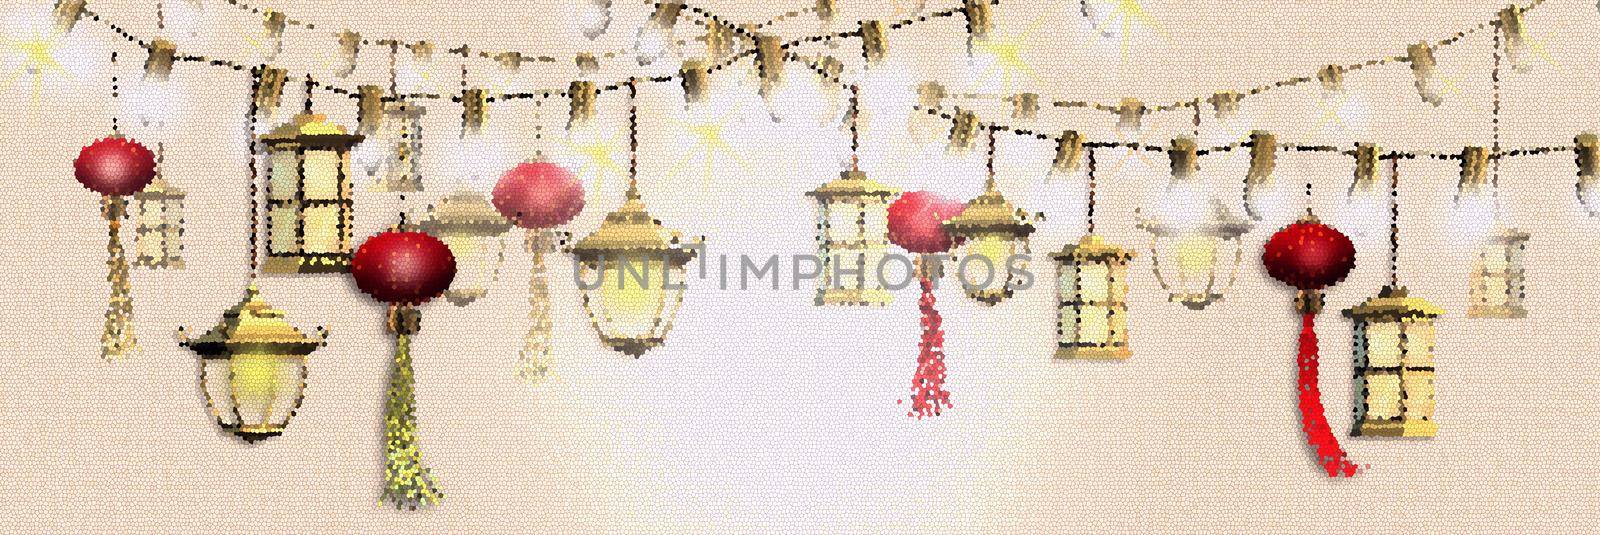 Lantern festival. Spring Chinese festival design. Oriental Asian traditional lanterns on string of lights on pastel yellow background. Place for text, 3D render